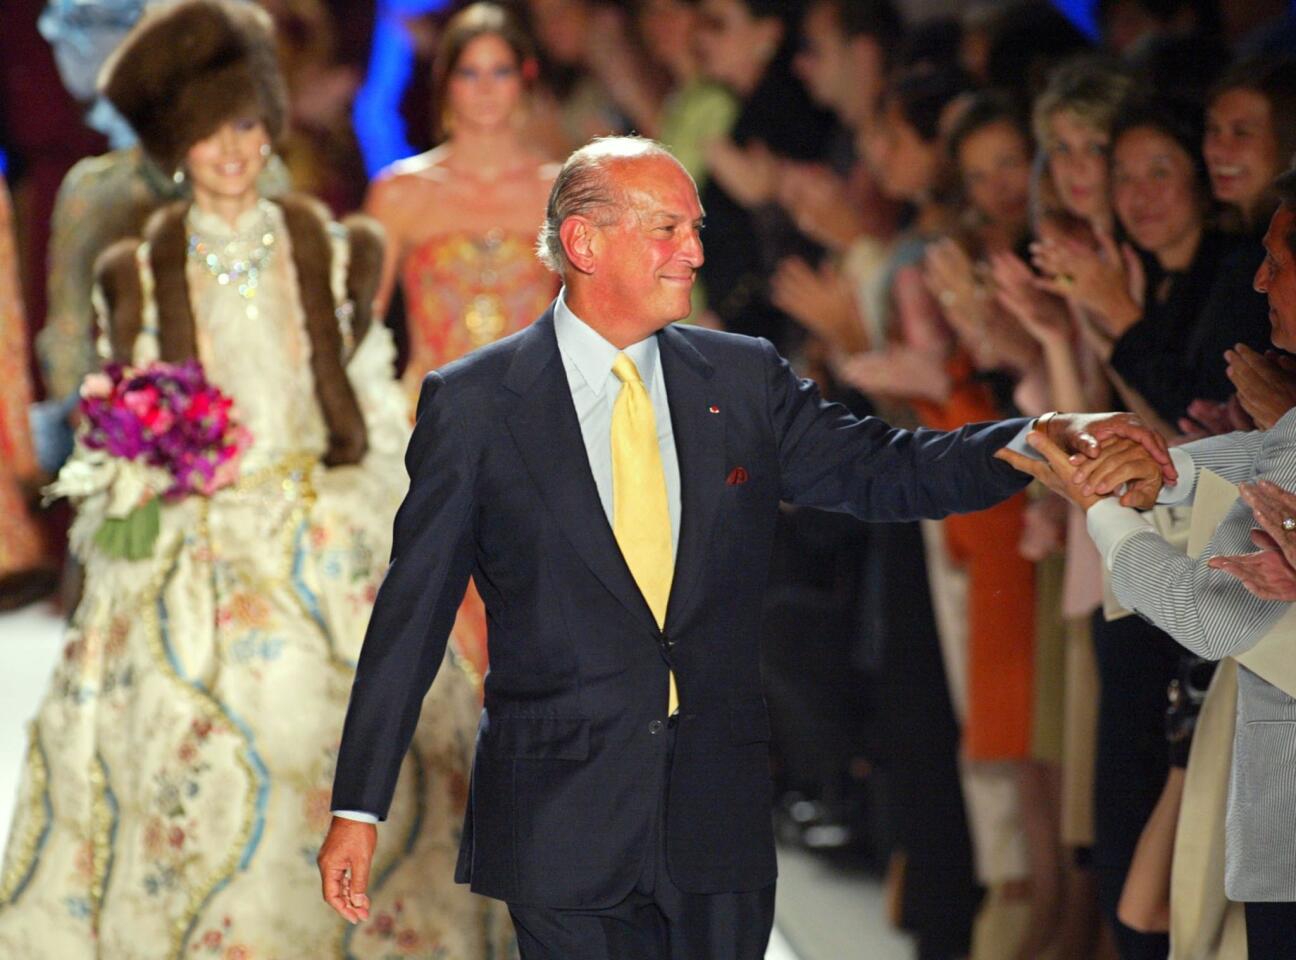 Designer Oscar de la Renta acknowledges the audience after his swansong show for Pierre Balmain on July 9, 2002, during the autumn/winter 2002/2003 haute couture collections in Paris.